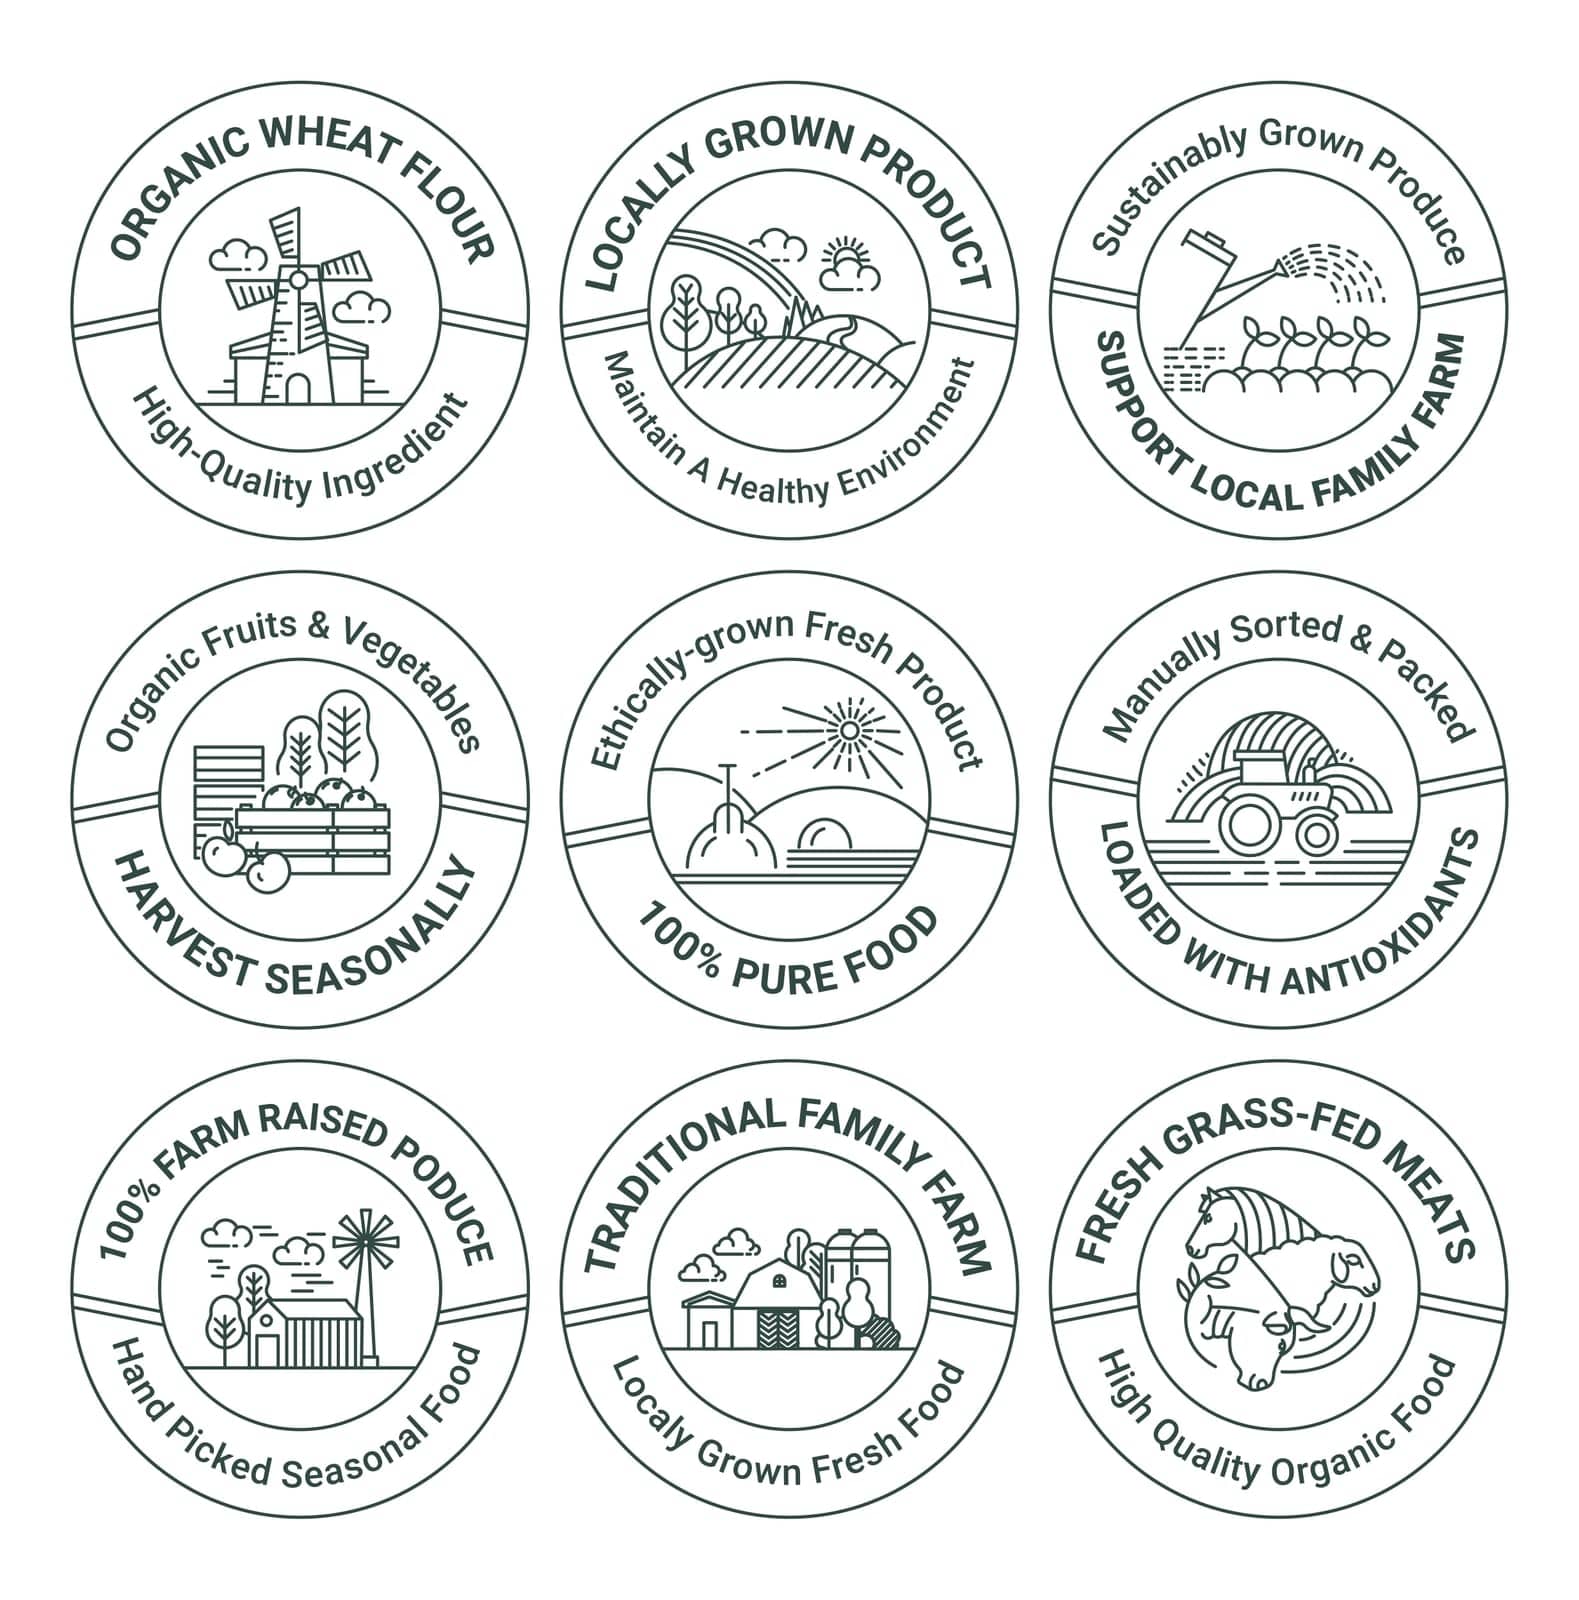 Sticker tag set for organic locally grown product by Sonulkaster